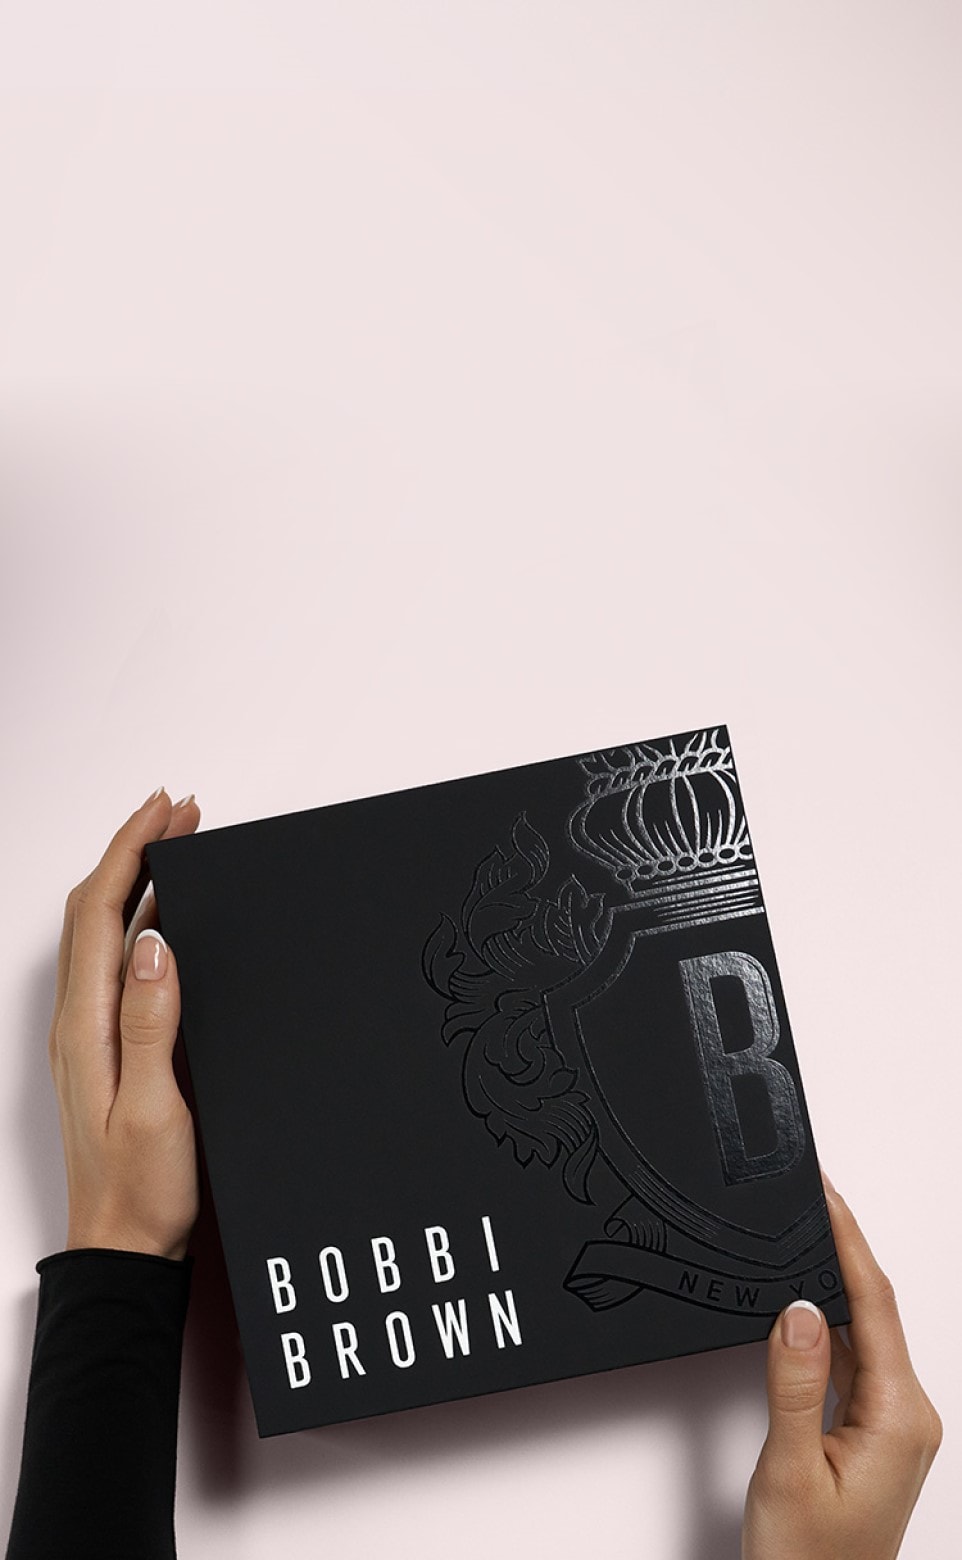 Image containing new Bobbi Brown giftwrap